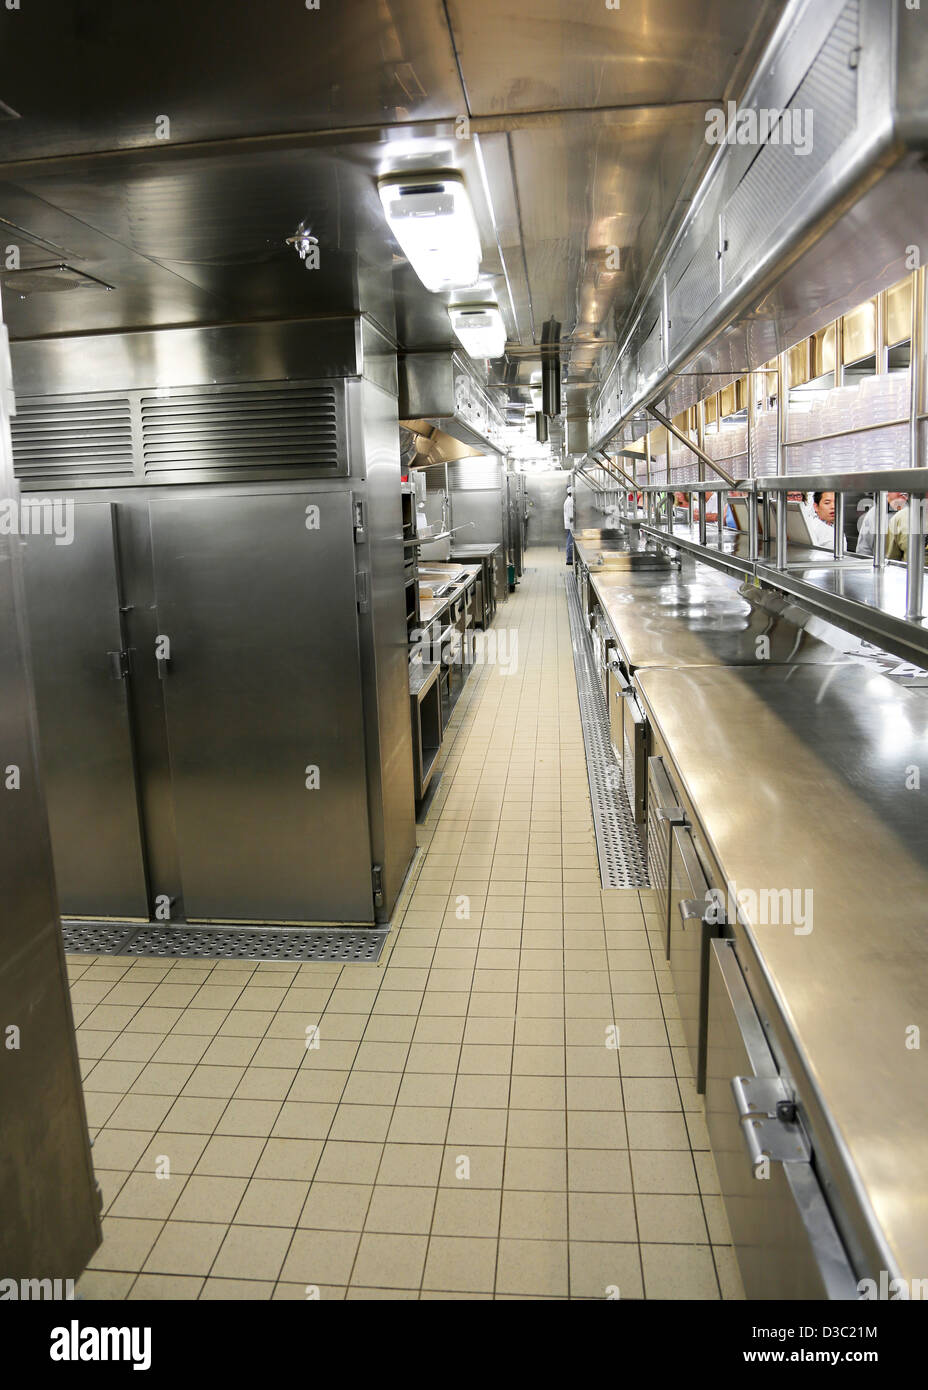 CATERING KITCHEN Stock Photo